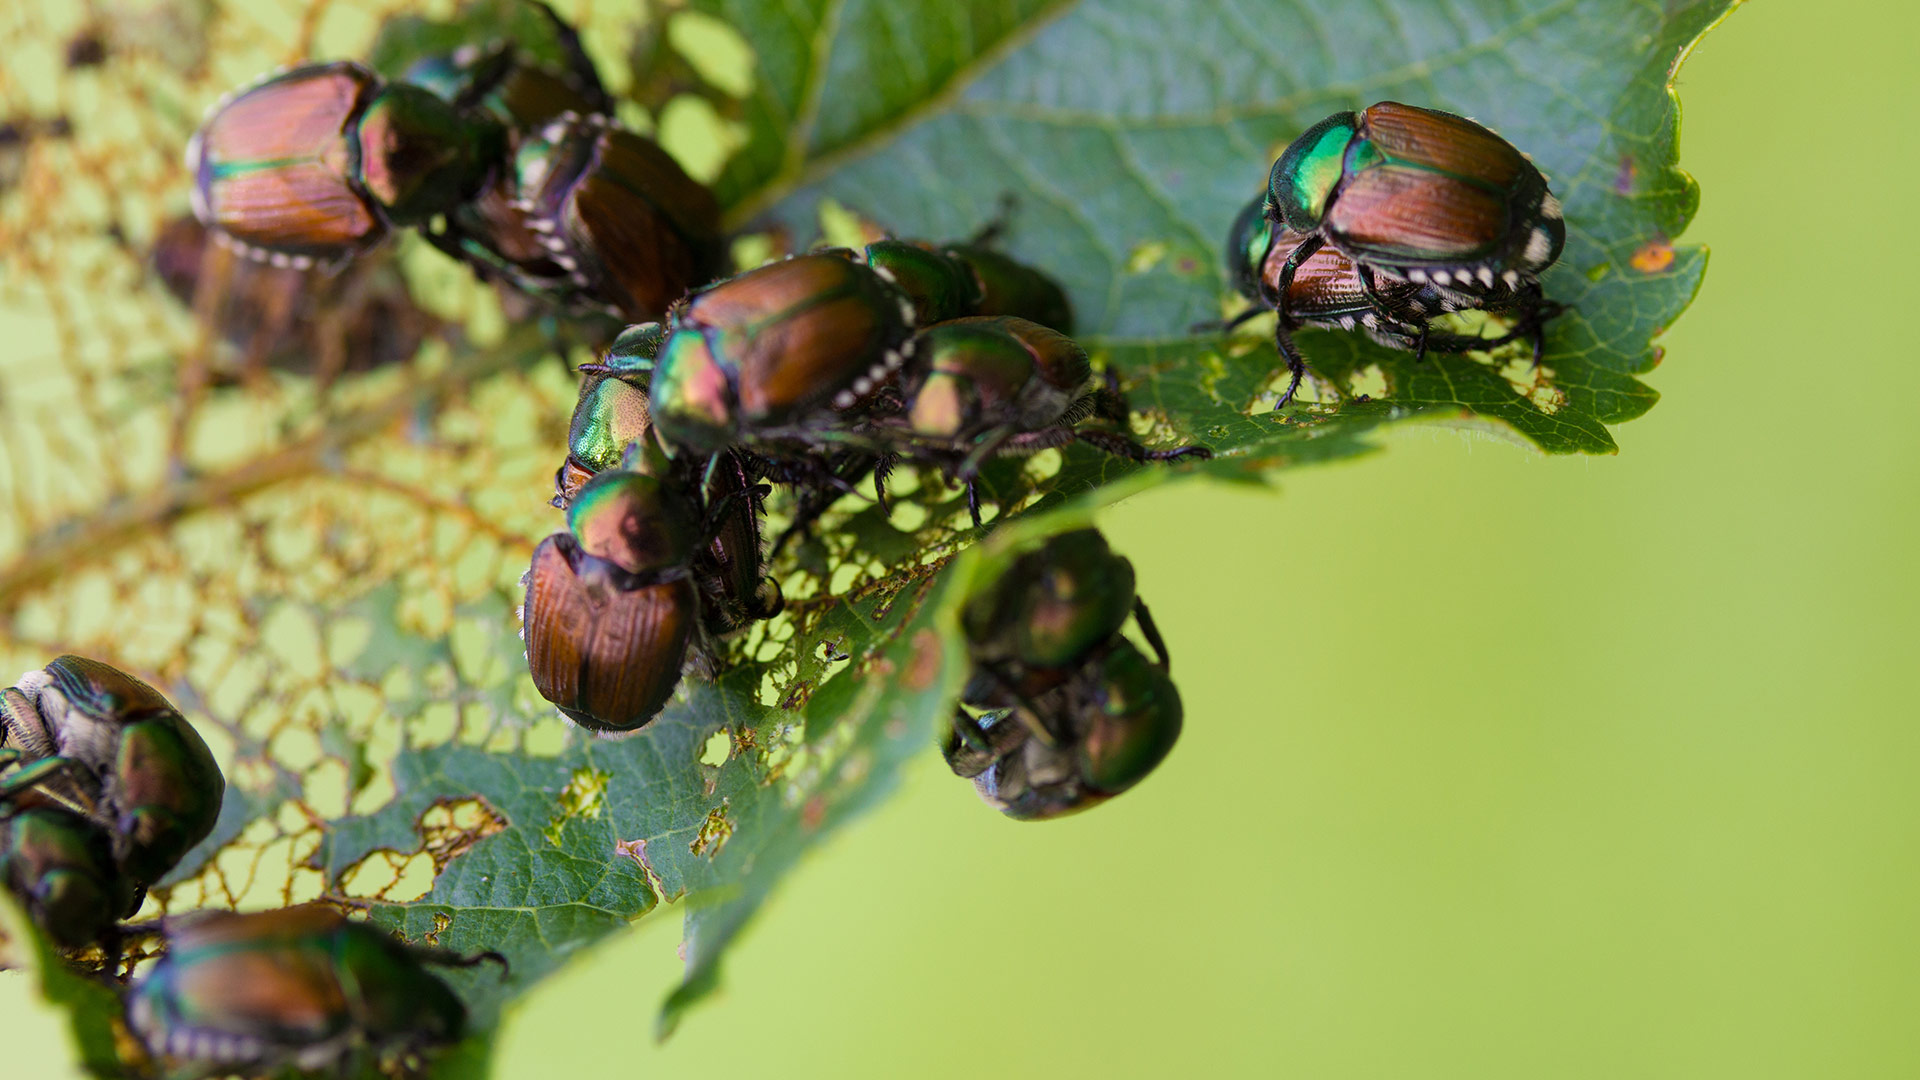 Group of japanese beetles eating lawn leaves in St. Clair Shores, MI.